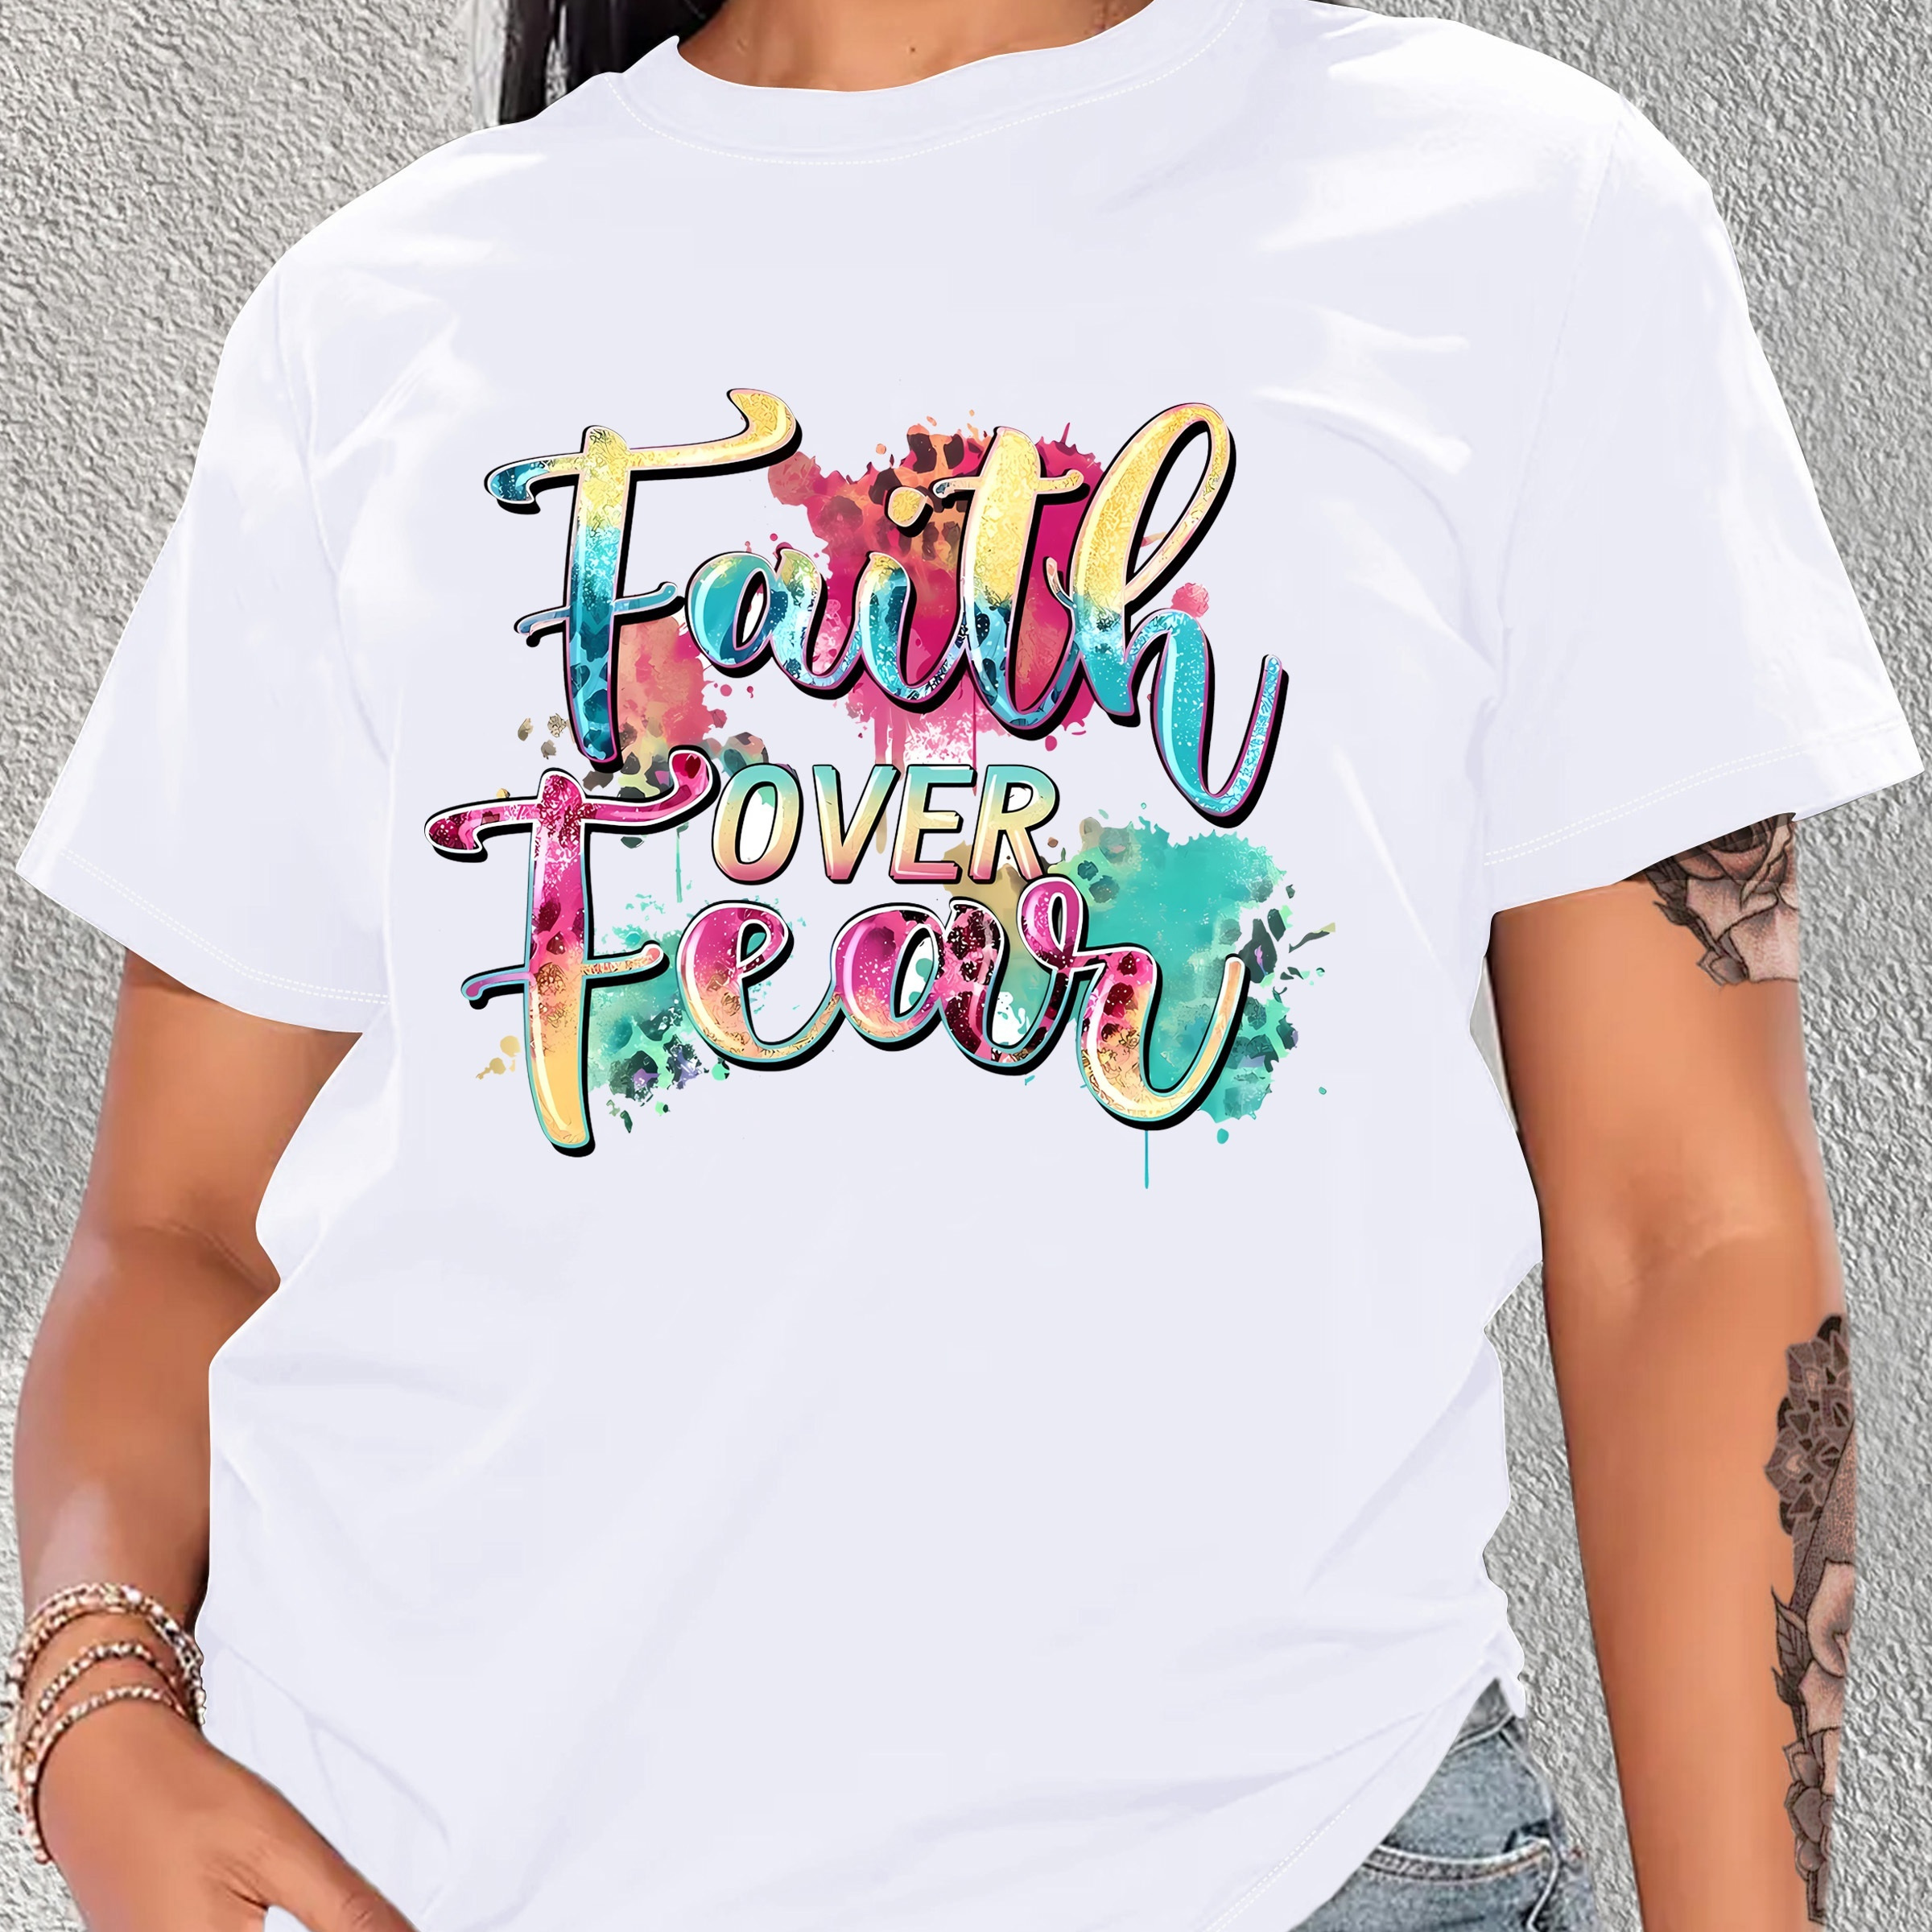 

Splash Print Faith Over Fear Graphic Short Sleeves Sports Tee, Round Neck Workout Causal T-shirt Top, Women's Activewear